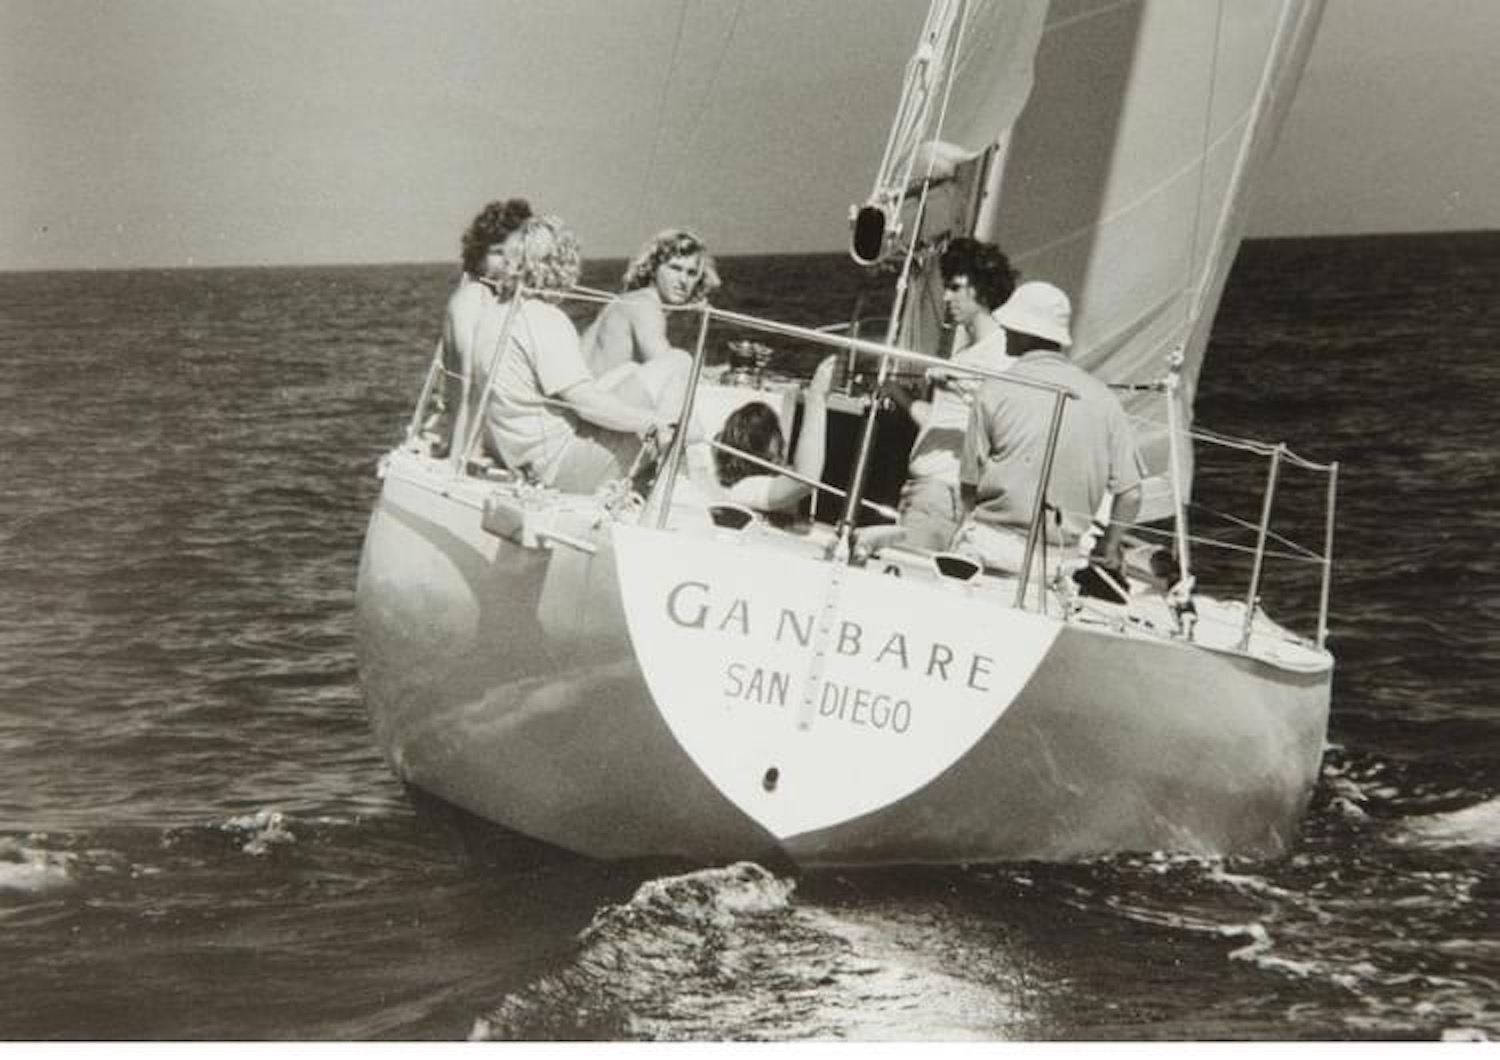 sailing yacht Gambare designed by Ron Holland racing off Porto Cervo, Italy 1973